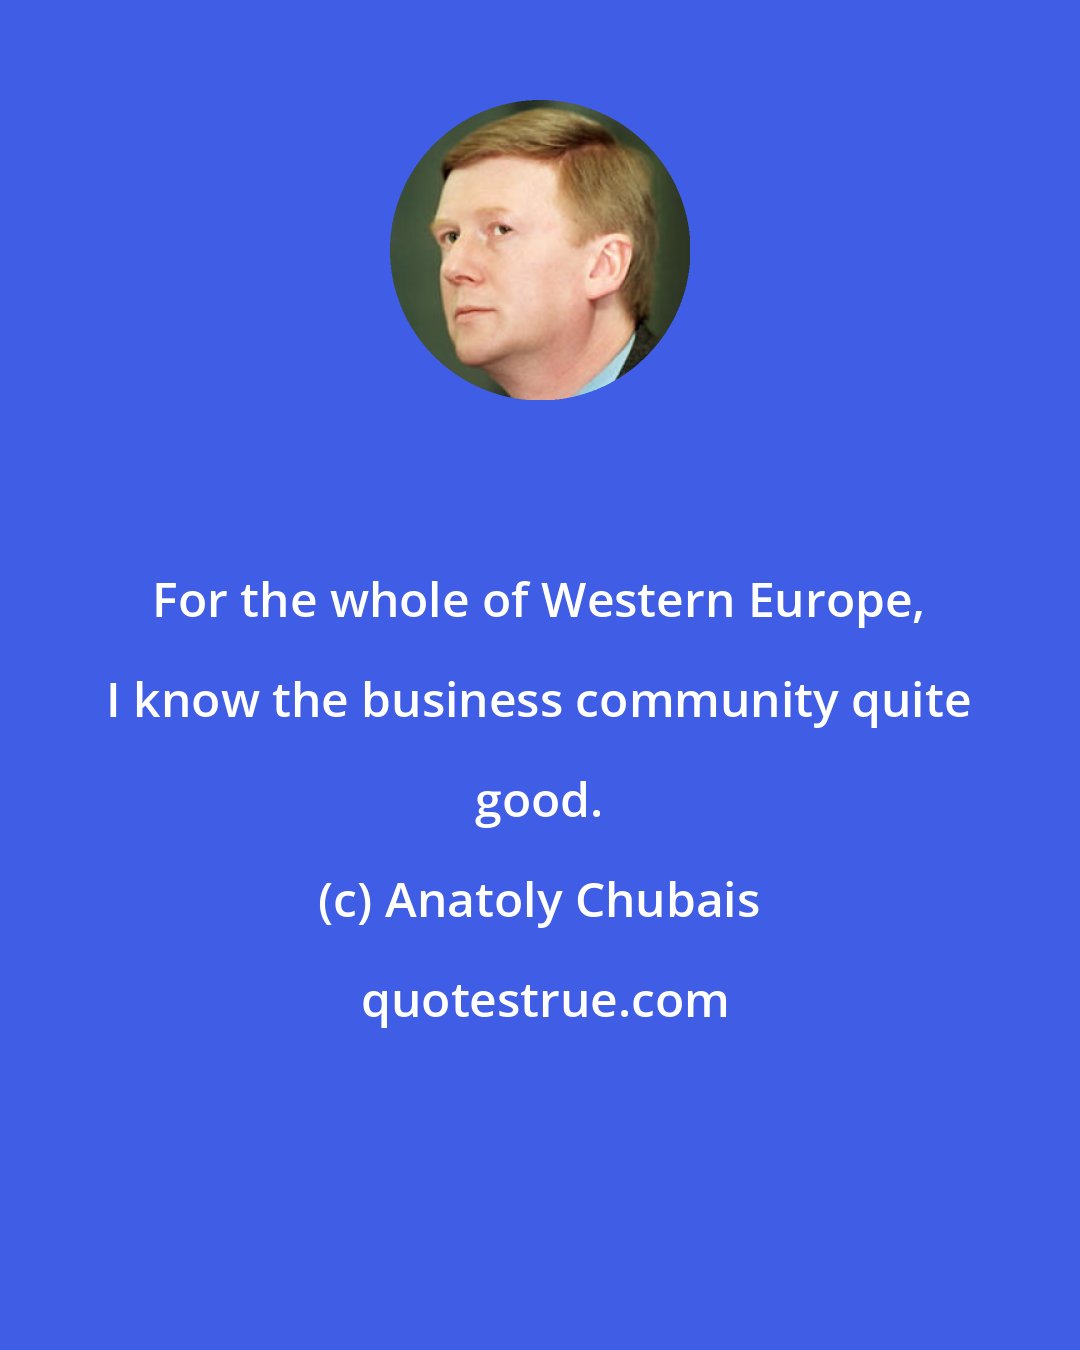 Anatoly Chubais: For the whole of Western Europe, I know the business community quite good.